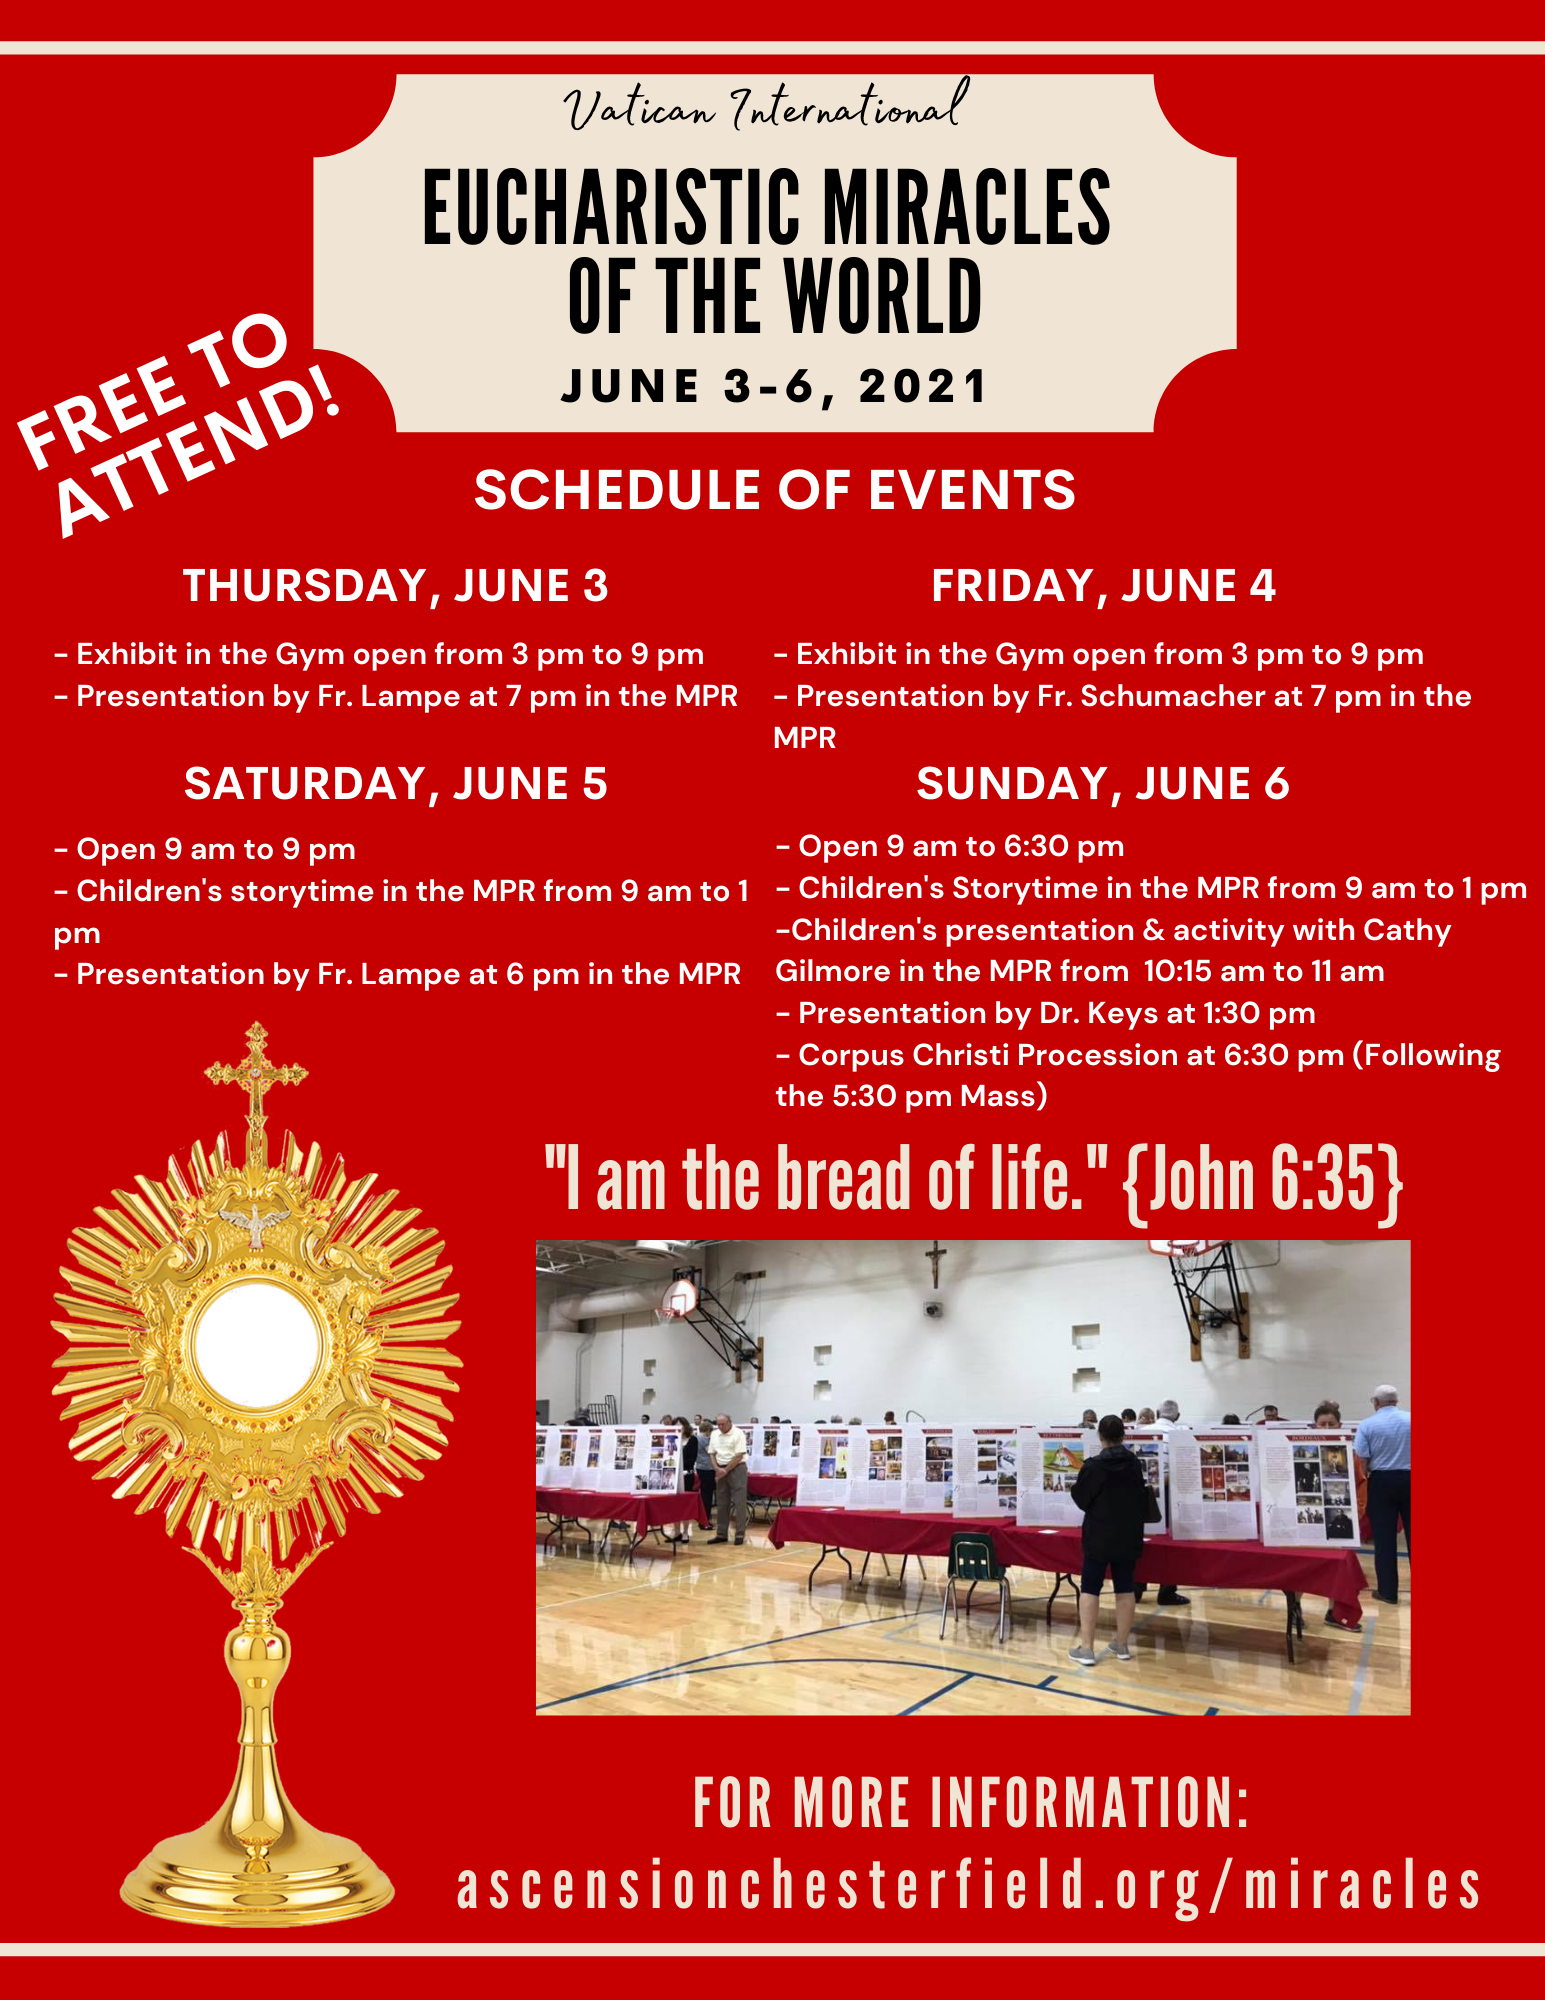 Vatican International Eucharistic Miracles of the World Exhibition